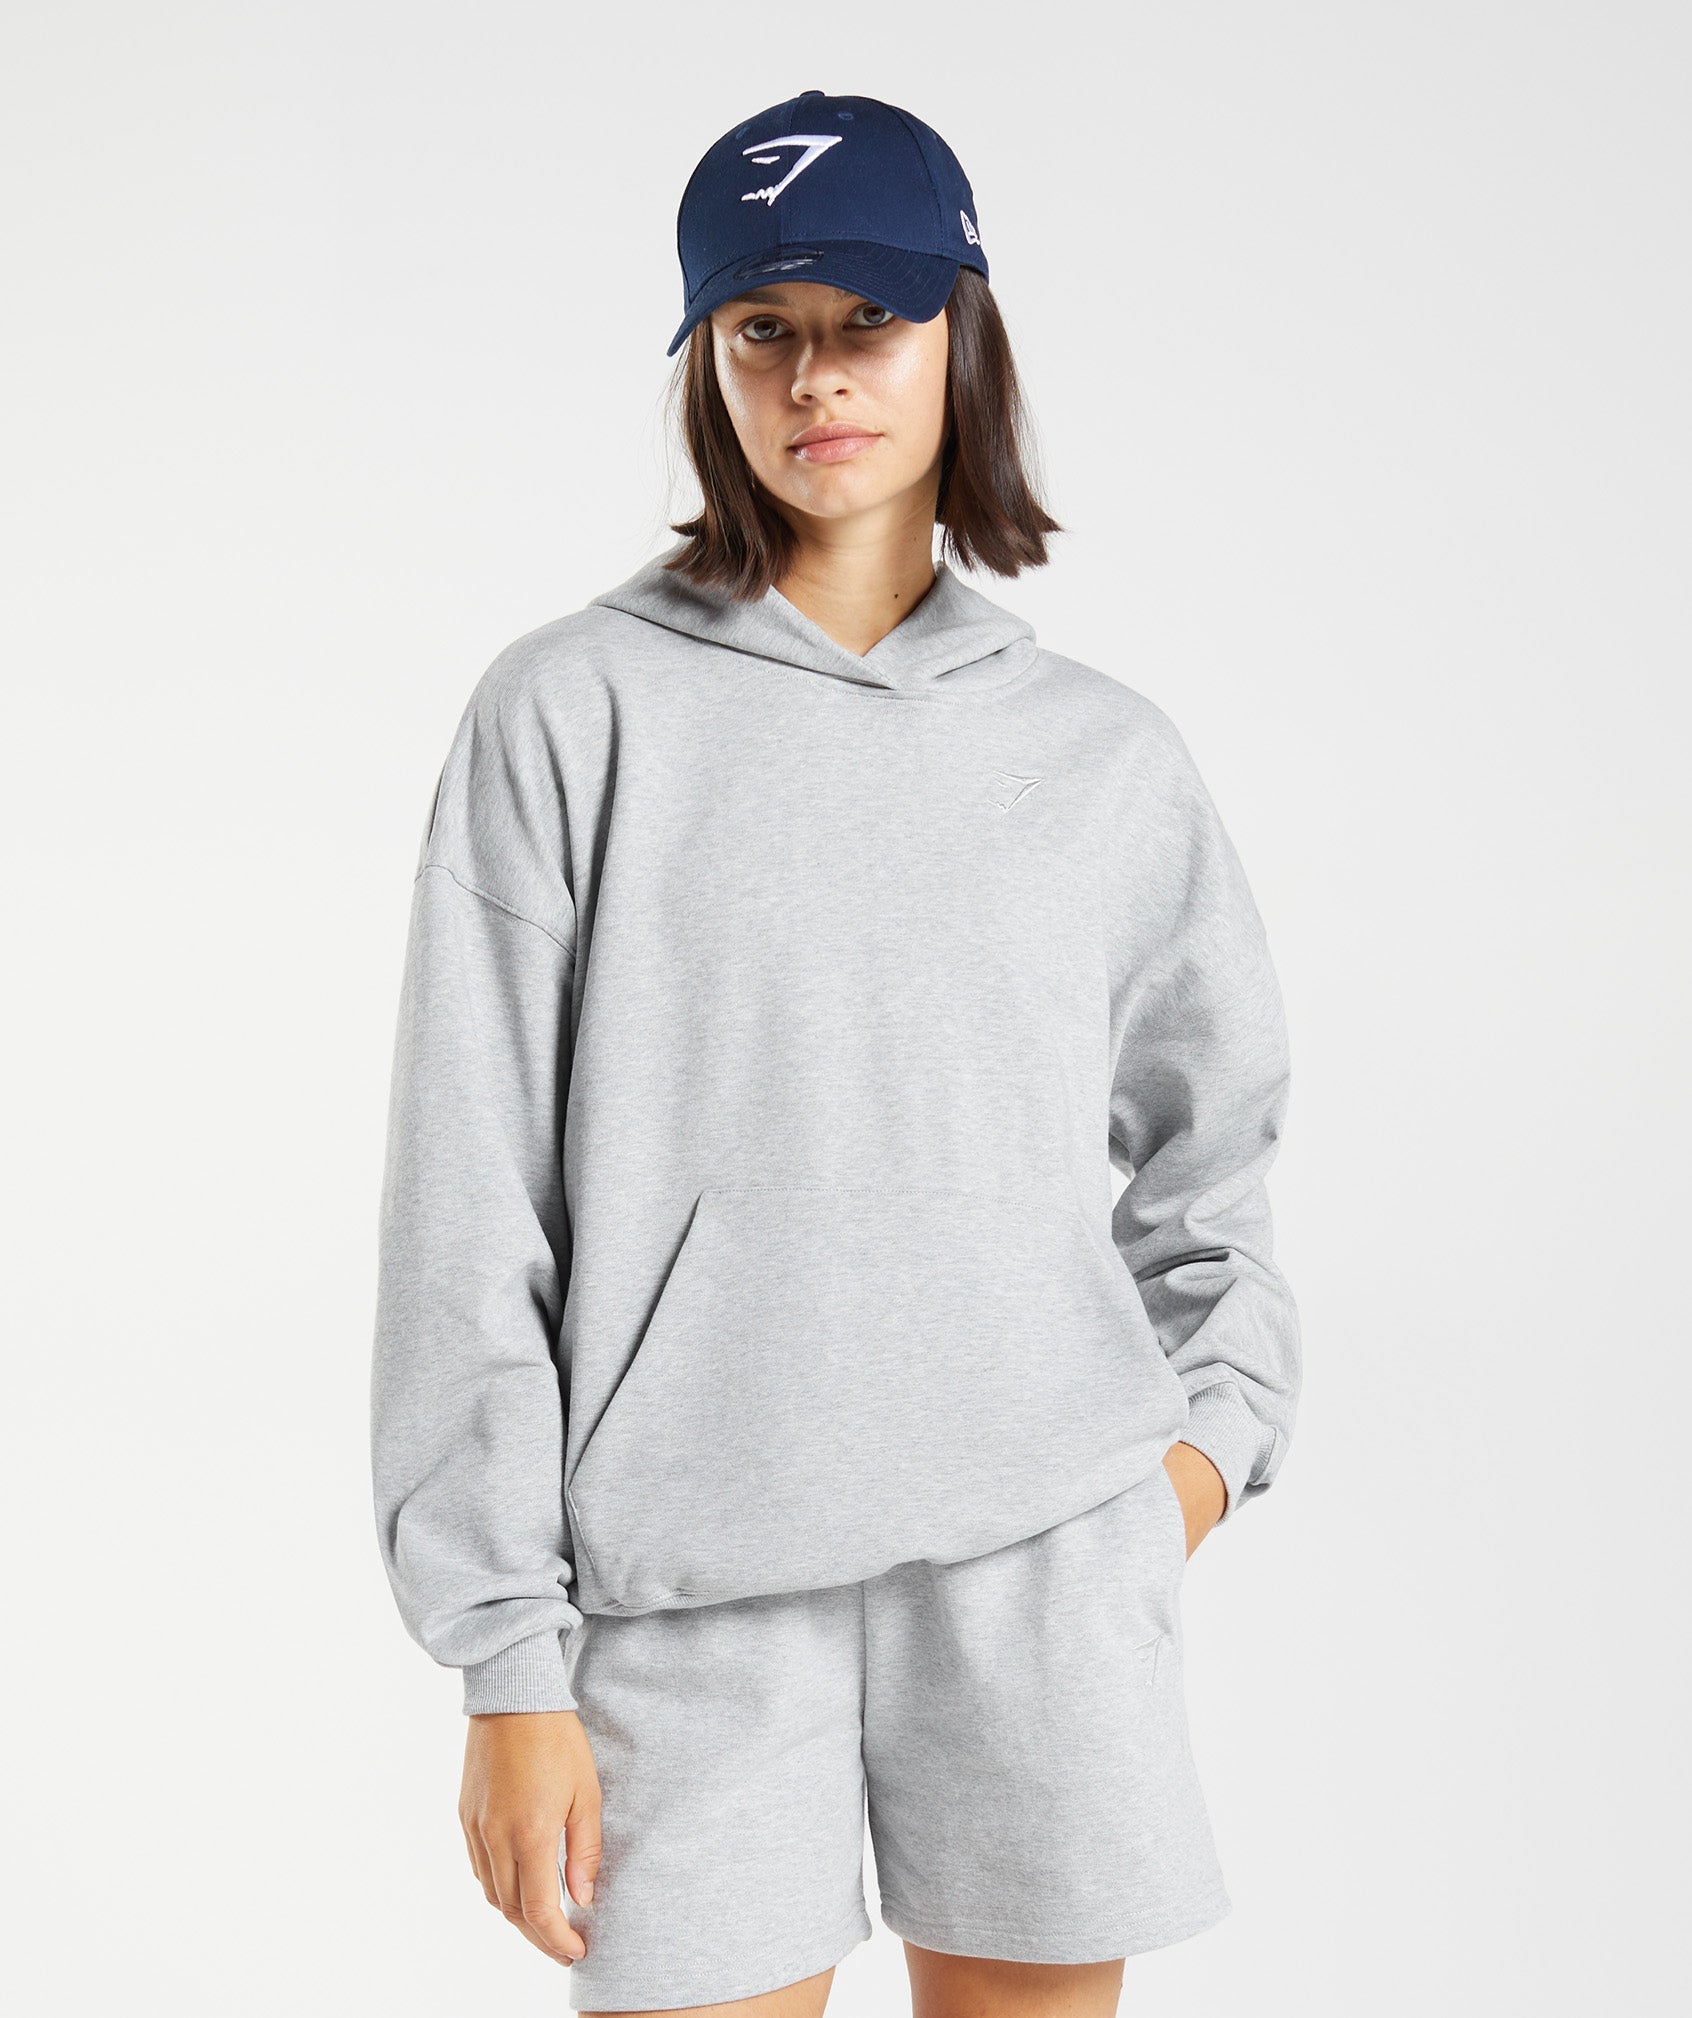 Gymshark Rest Day Sweats Cropped Pullover - Light Grey Core Marl